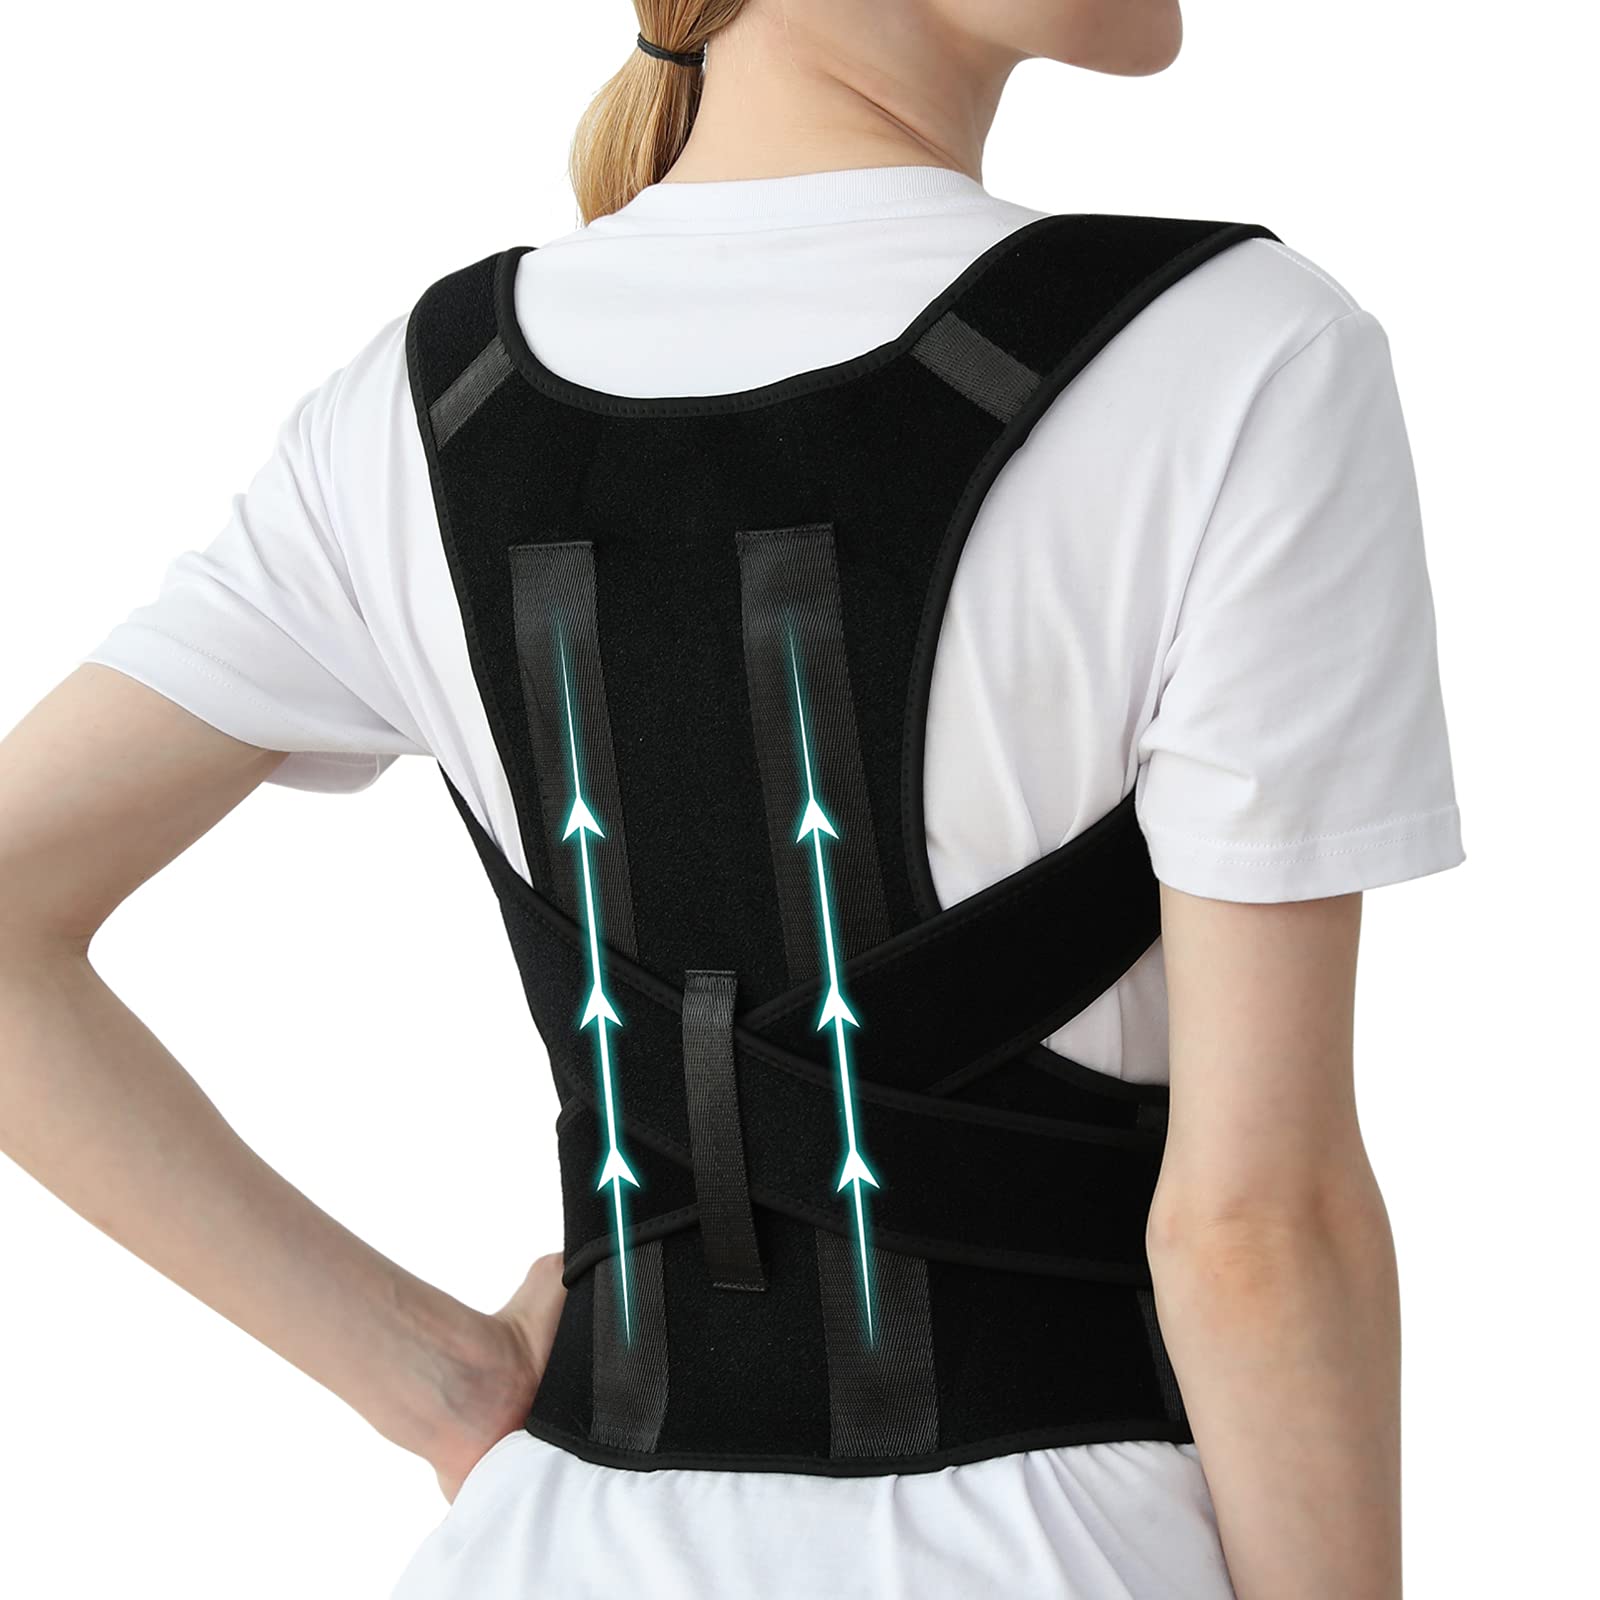 Posture Corrector for Men and Women Upper Back Brace for Clavicle Support,  Adjustable Back Straightener Weekly and Providing Pain Relief Cases from  Neck, Back & Shoulder Green Box One Size